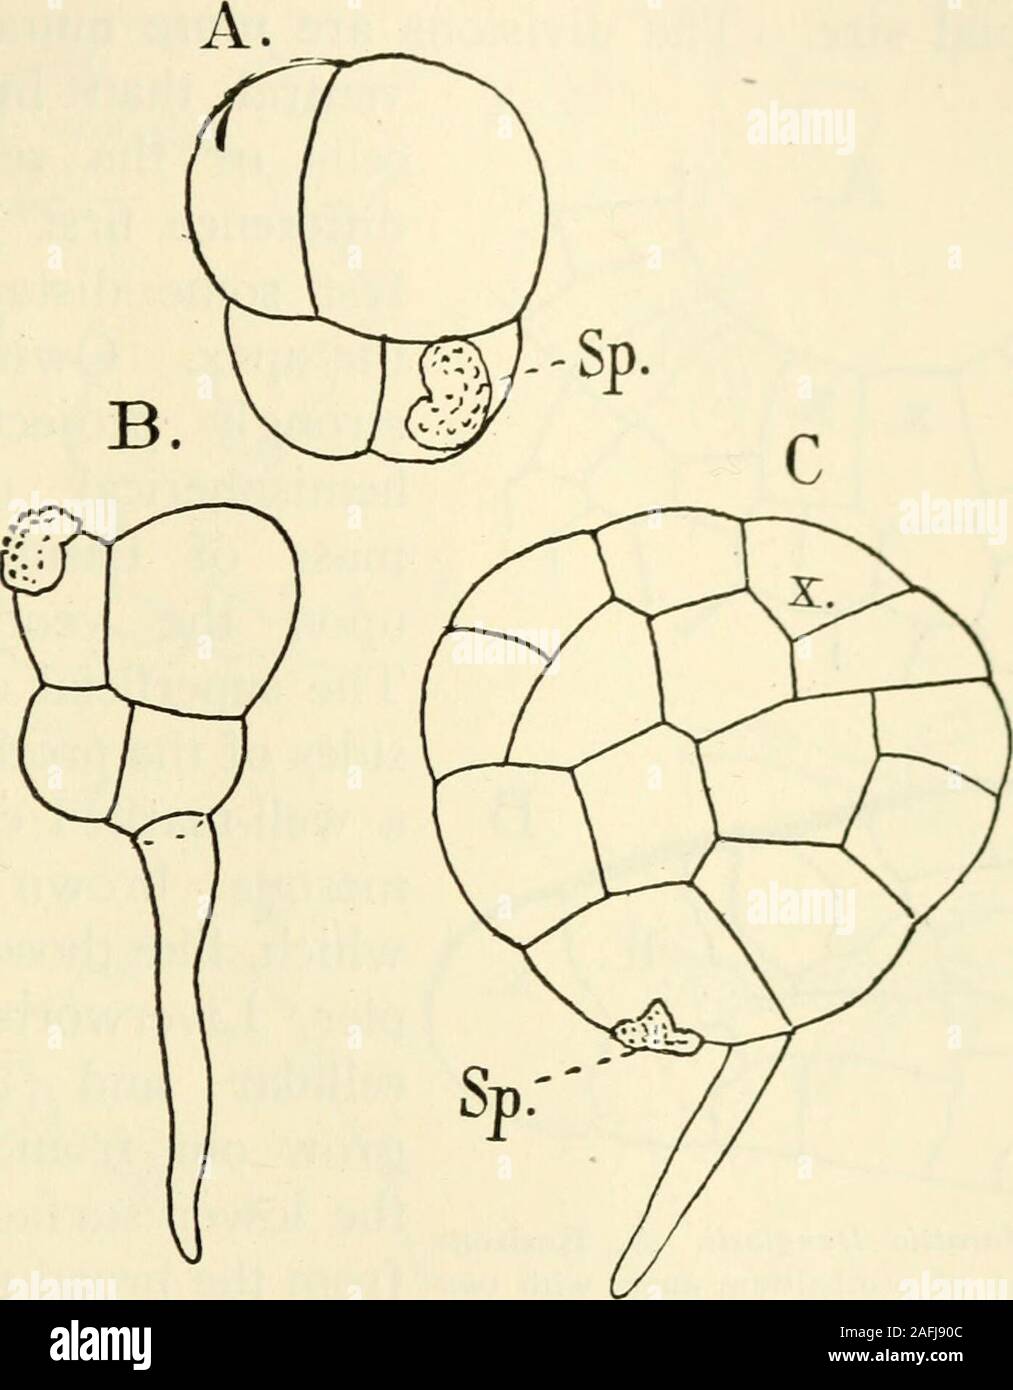 . The structure and development of mosses and ferns (Archegoniatae). apical cell from whichthe young prothallium for a long time grows (Fig. 149), muchas in Aneura. This type of prothallium, according to Jonkman,is commoner in Marattia than in Angiopteris^ where more com-monly a cell mass is the first result of germination. This latteris usually derived from the form where a rhizoid is developedat first. In this case only the larger of the primary cells givesrise to the prothallium. In the larger cell, divisions take placein three directions and transform it into a nearly globular cell VIII MA Stock Photo